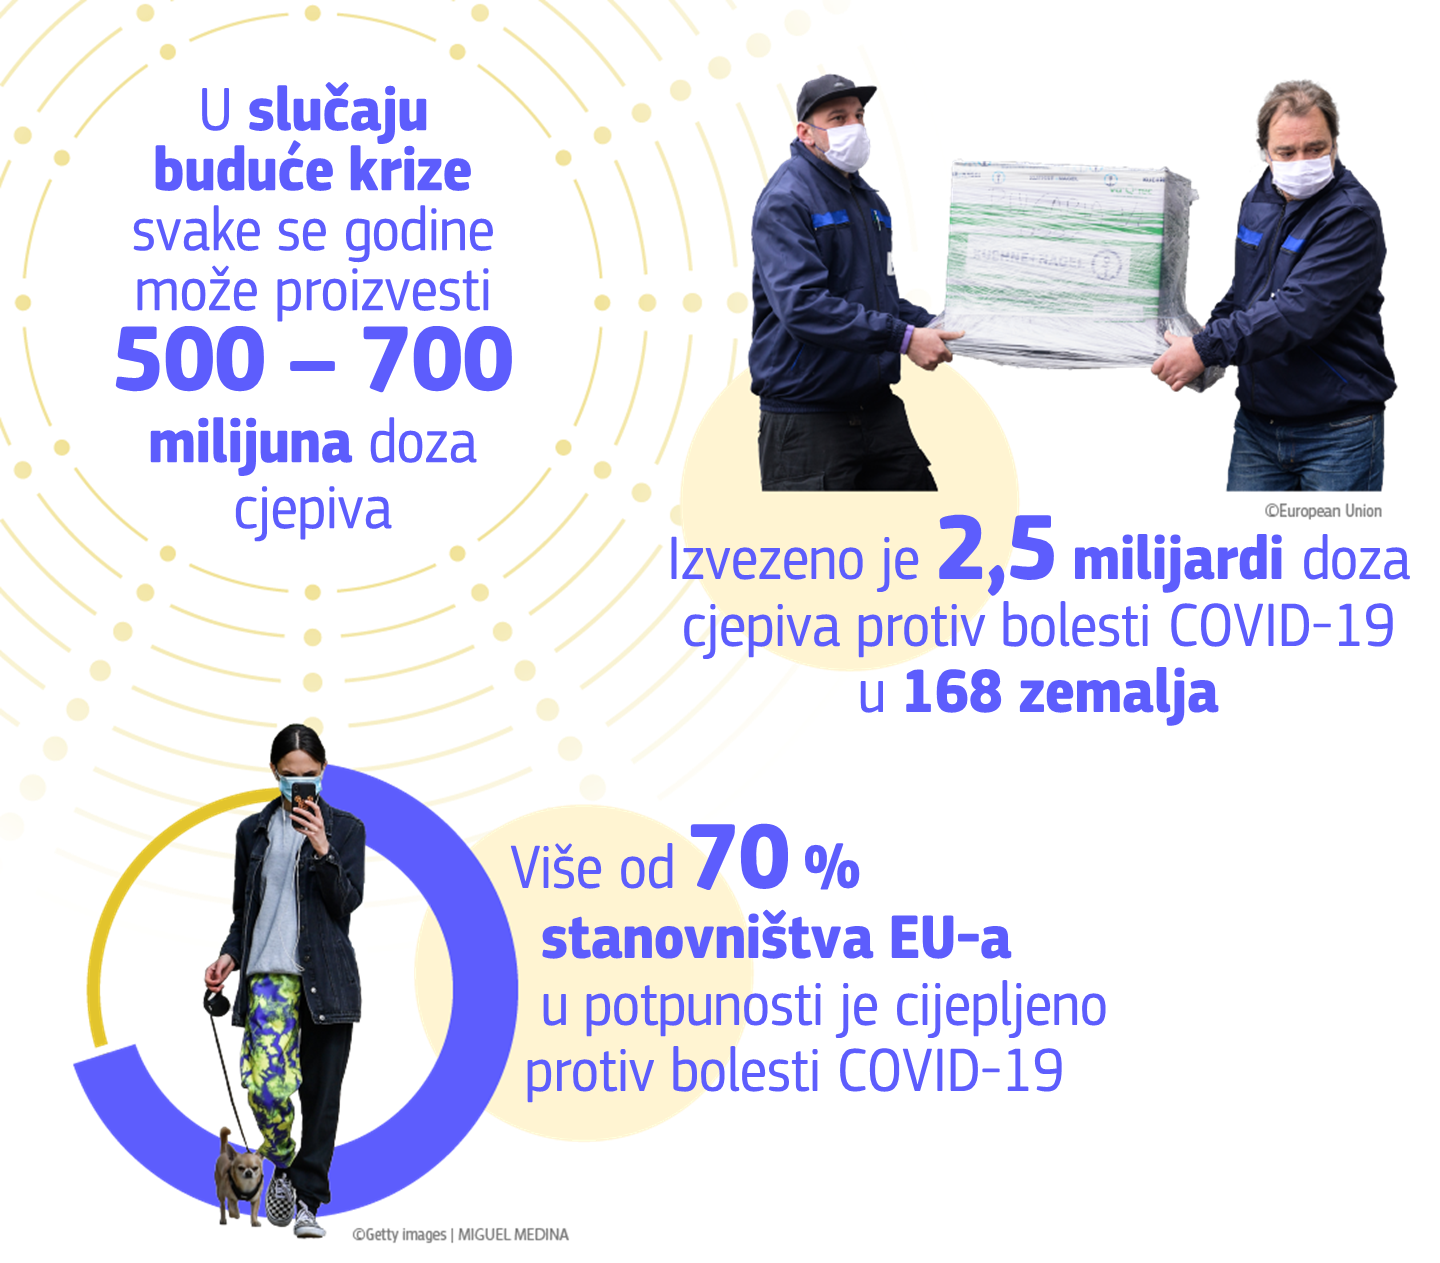 Infographic on overcoming COVID-19 in the EU